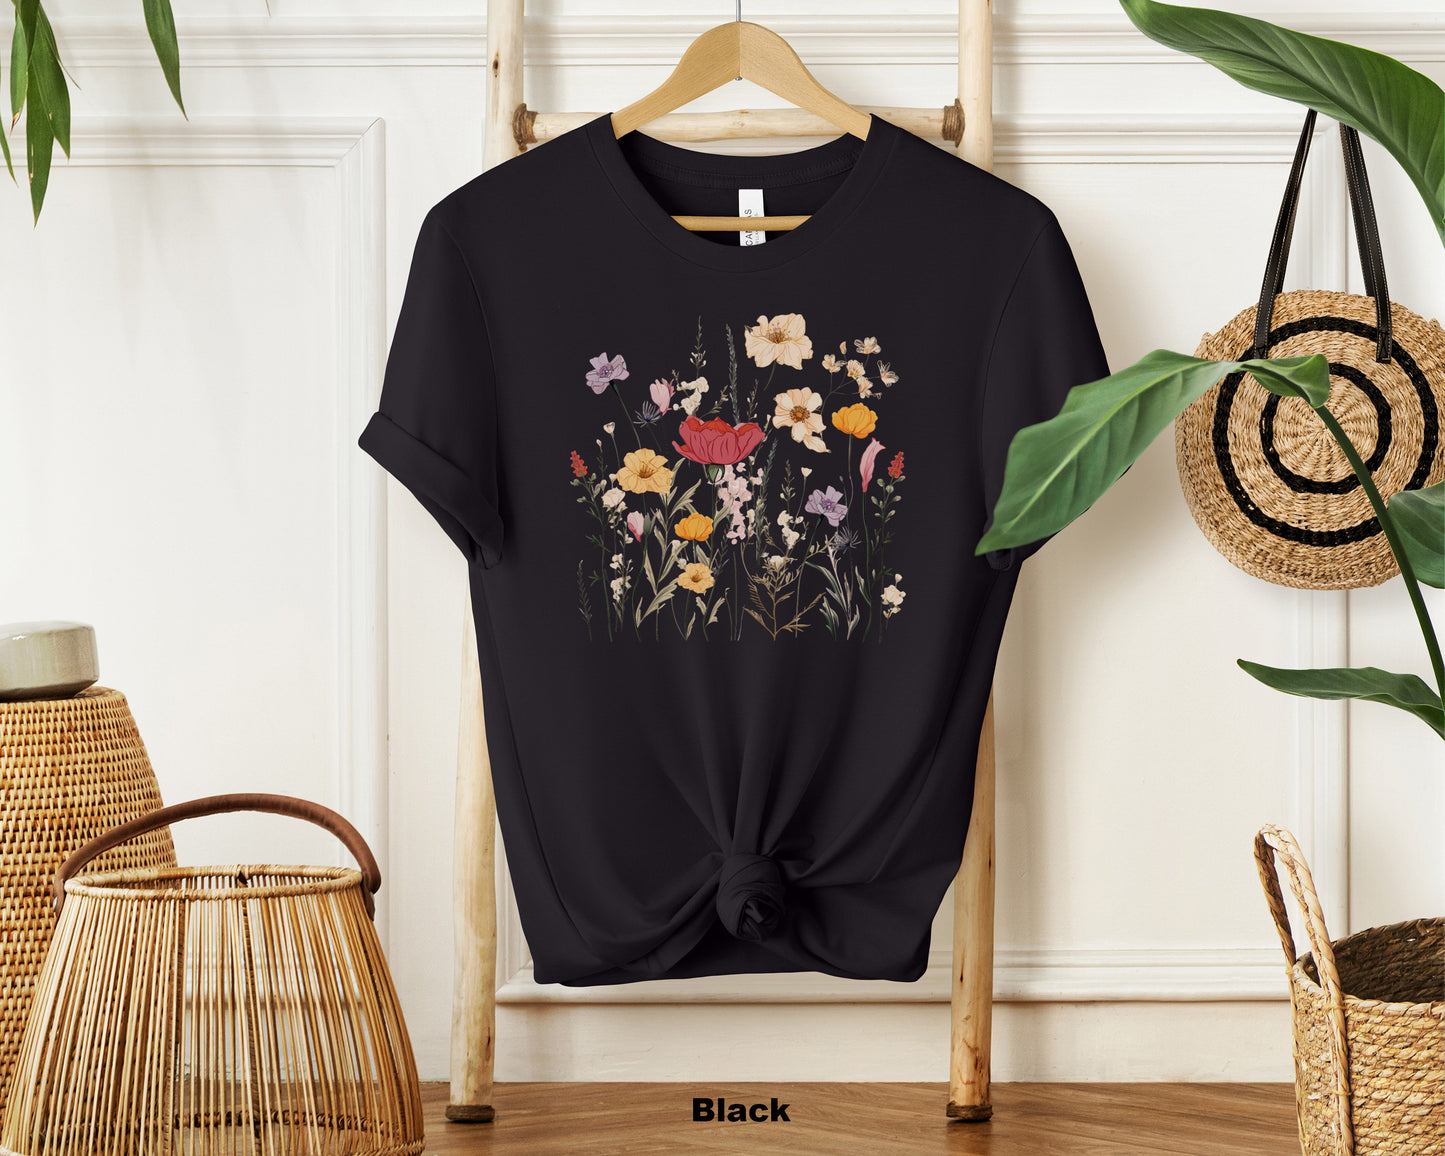 Whispering Wildflowers Women's Floral Print Top - Nature's Tranquility T-Shirt